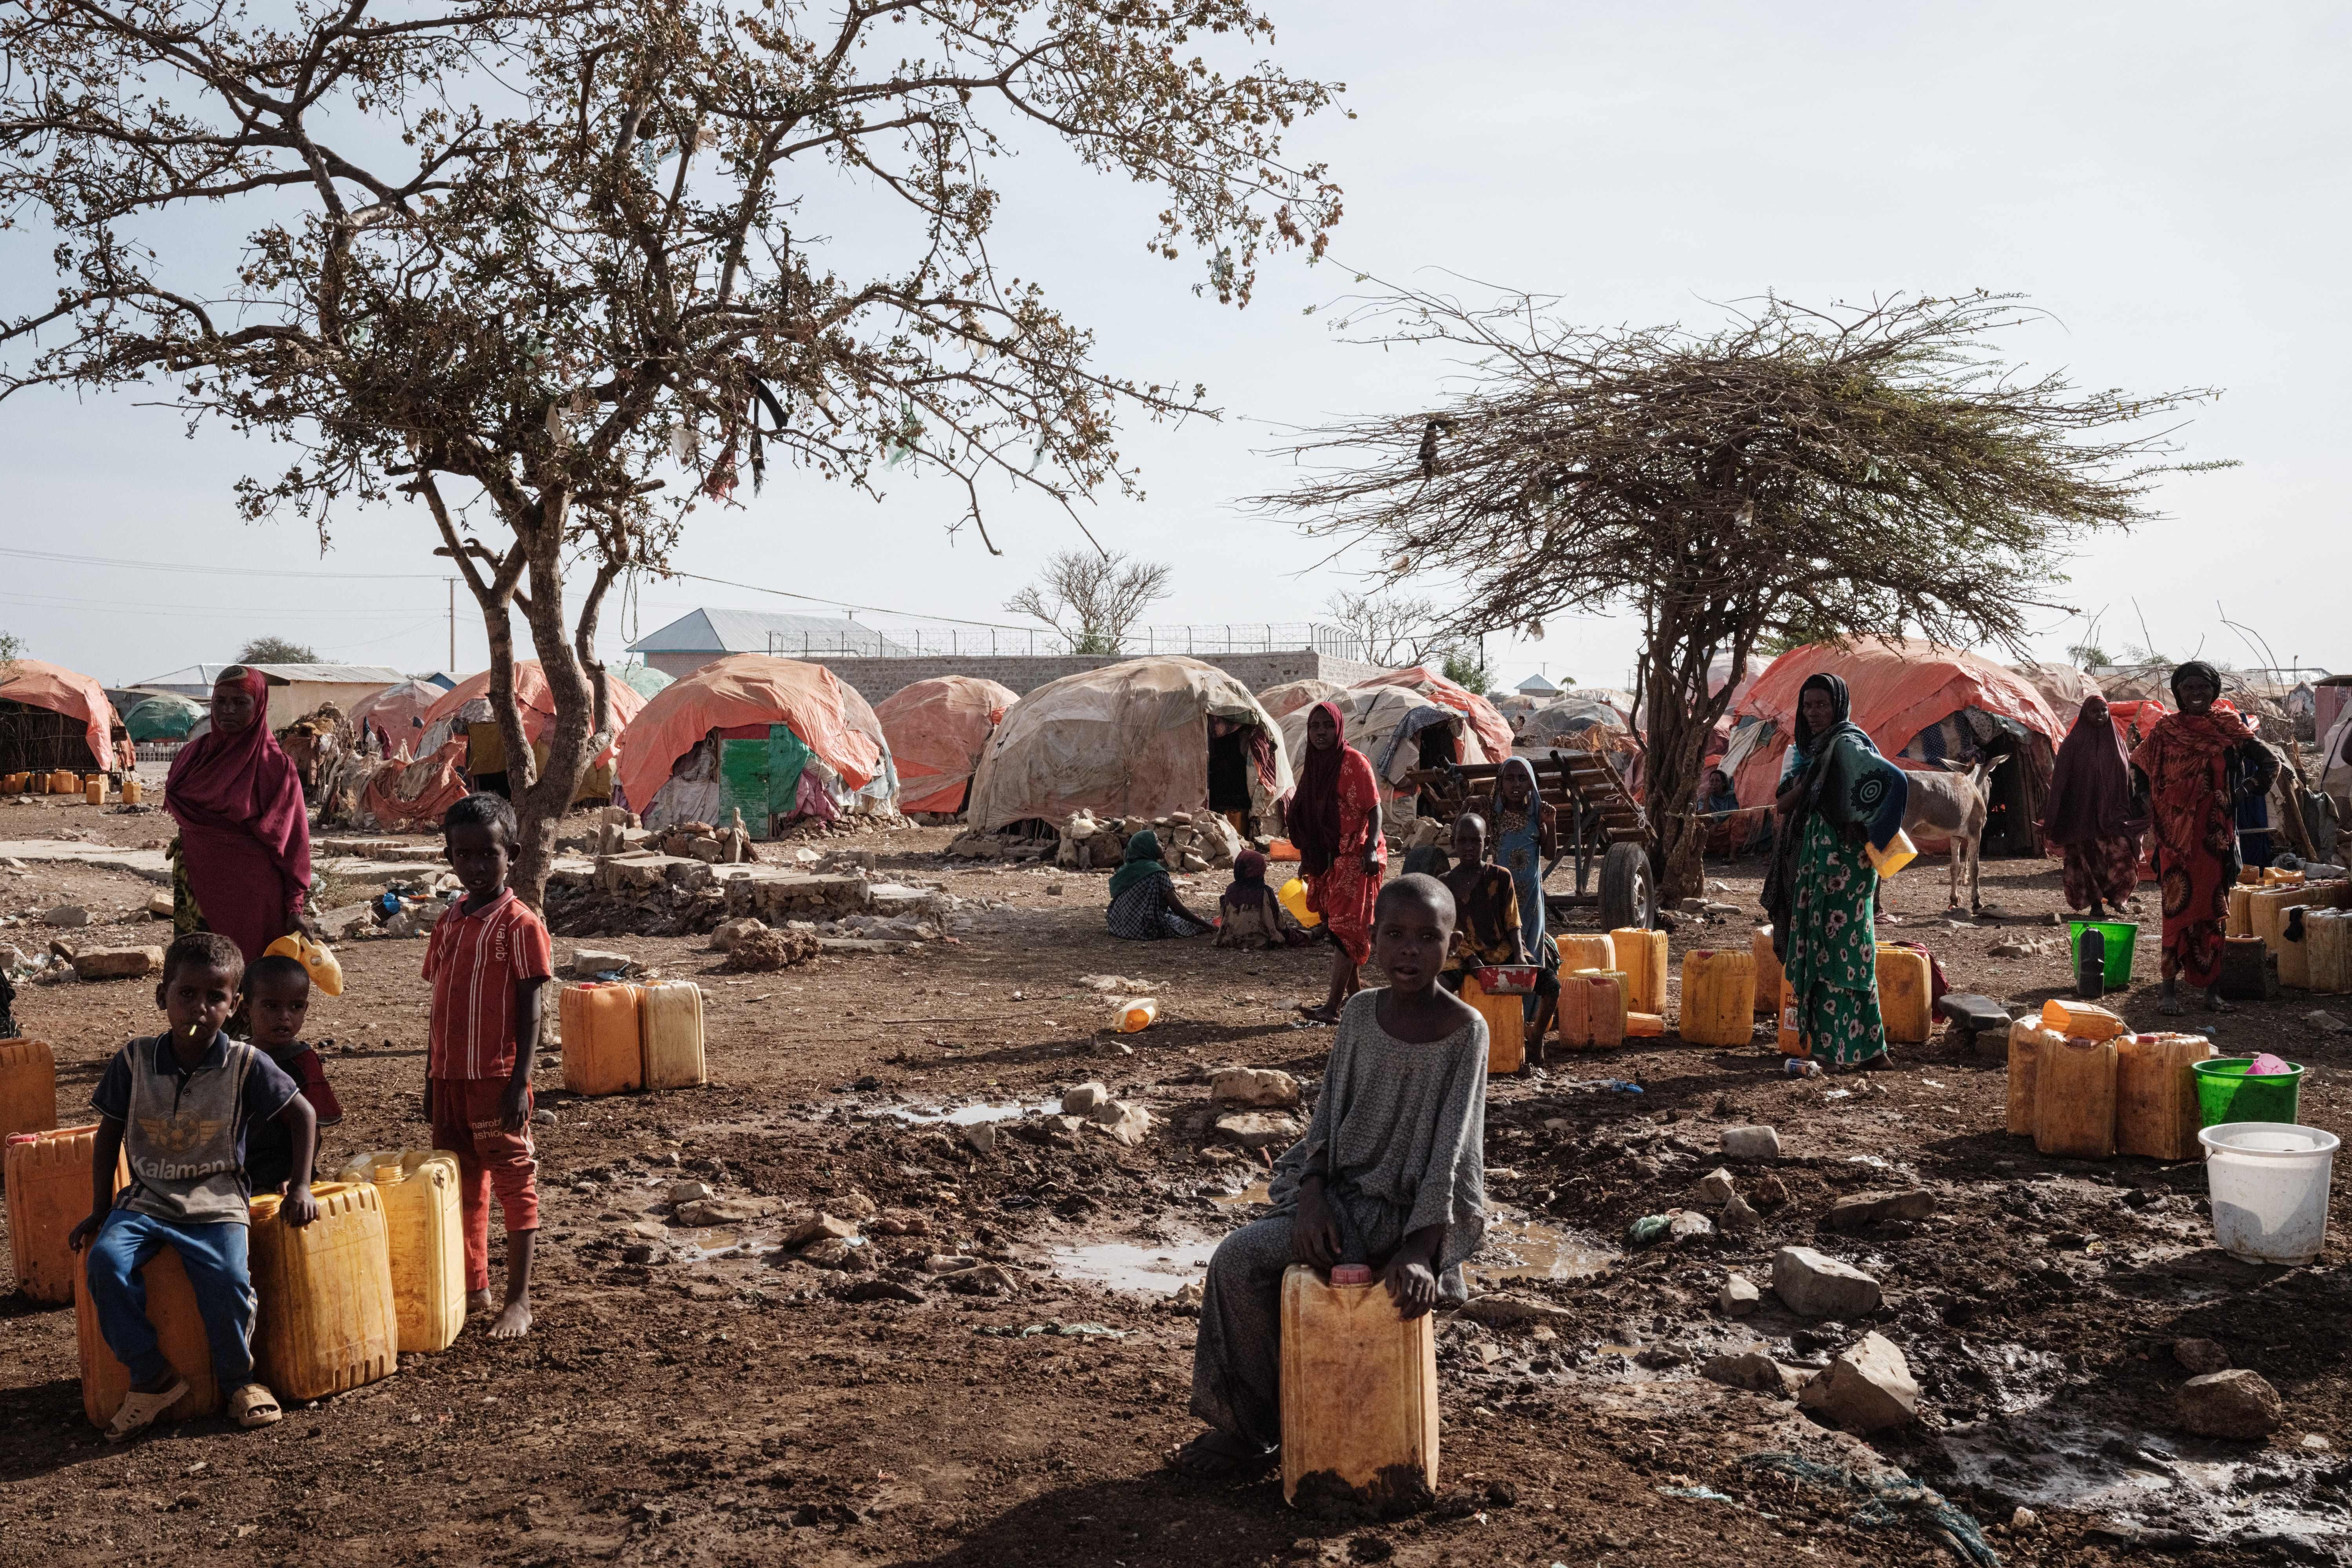 People wait for water with containers at a camp for internally displaced persons in Baidoa, Somalia, on February 13, 2022.